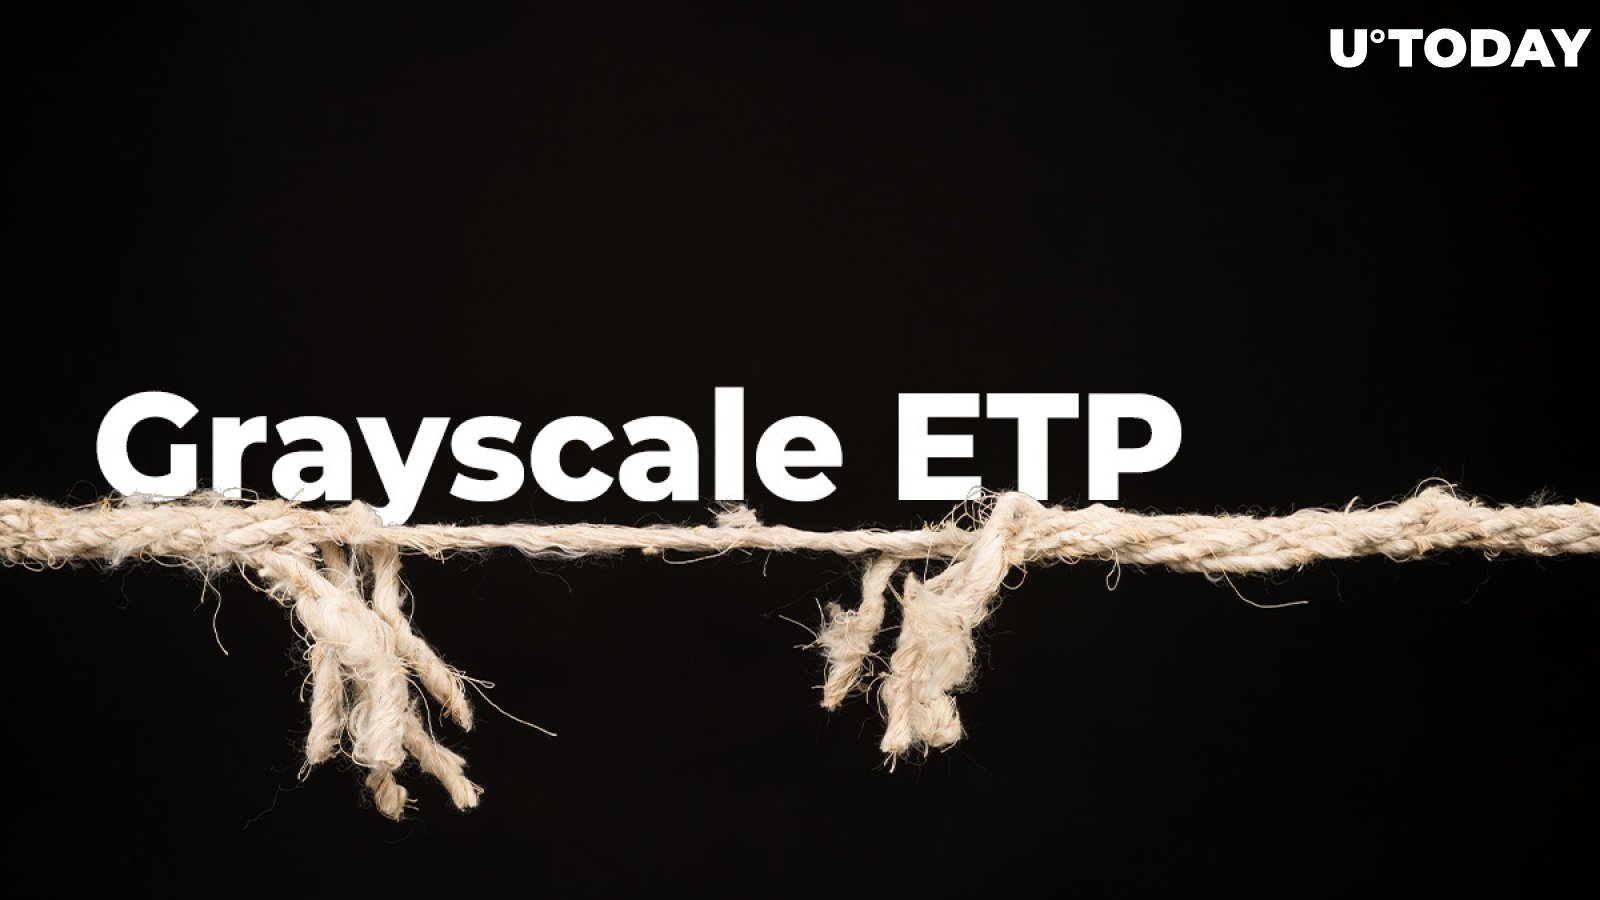 Grayscale Bitcoin ETPs Show Weak Performance While Other ETP Volumes Spike in October